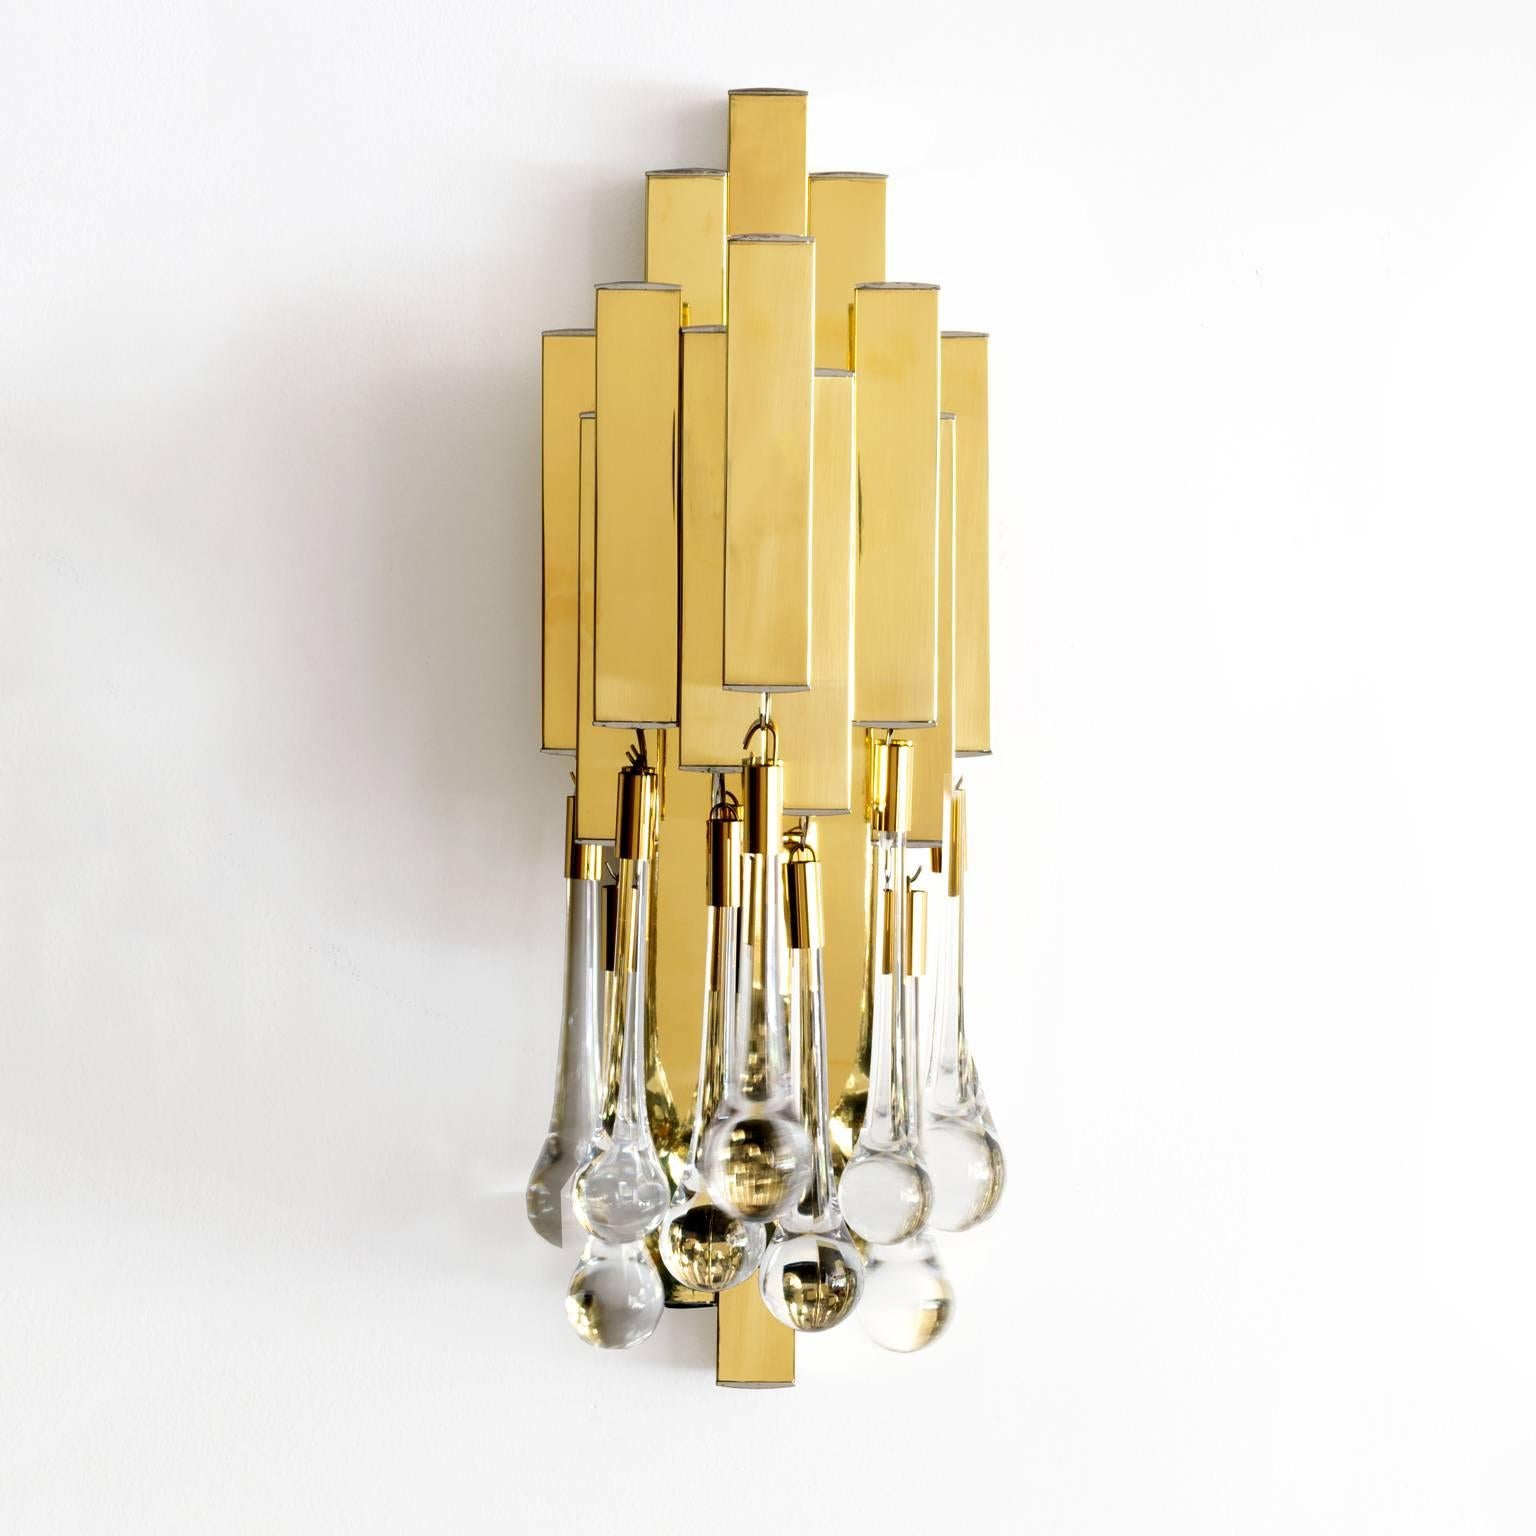 French Pair of Mid-Century Modern Brass and Crystal Sconces by Lumica, Barcelona Spain For Sale